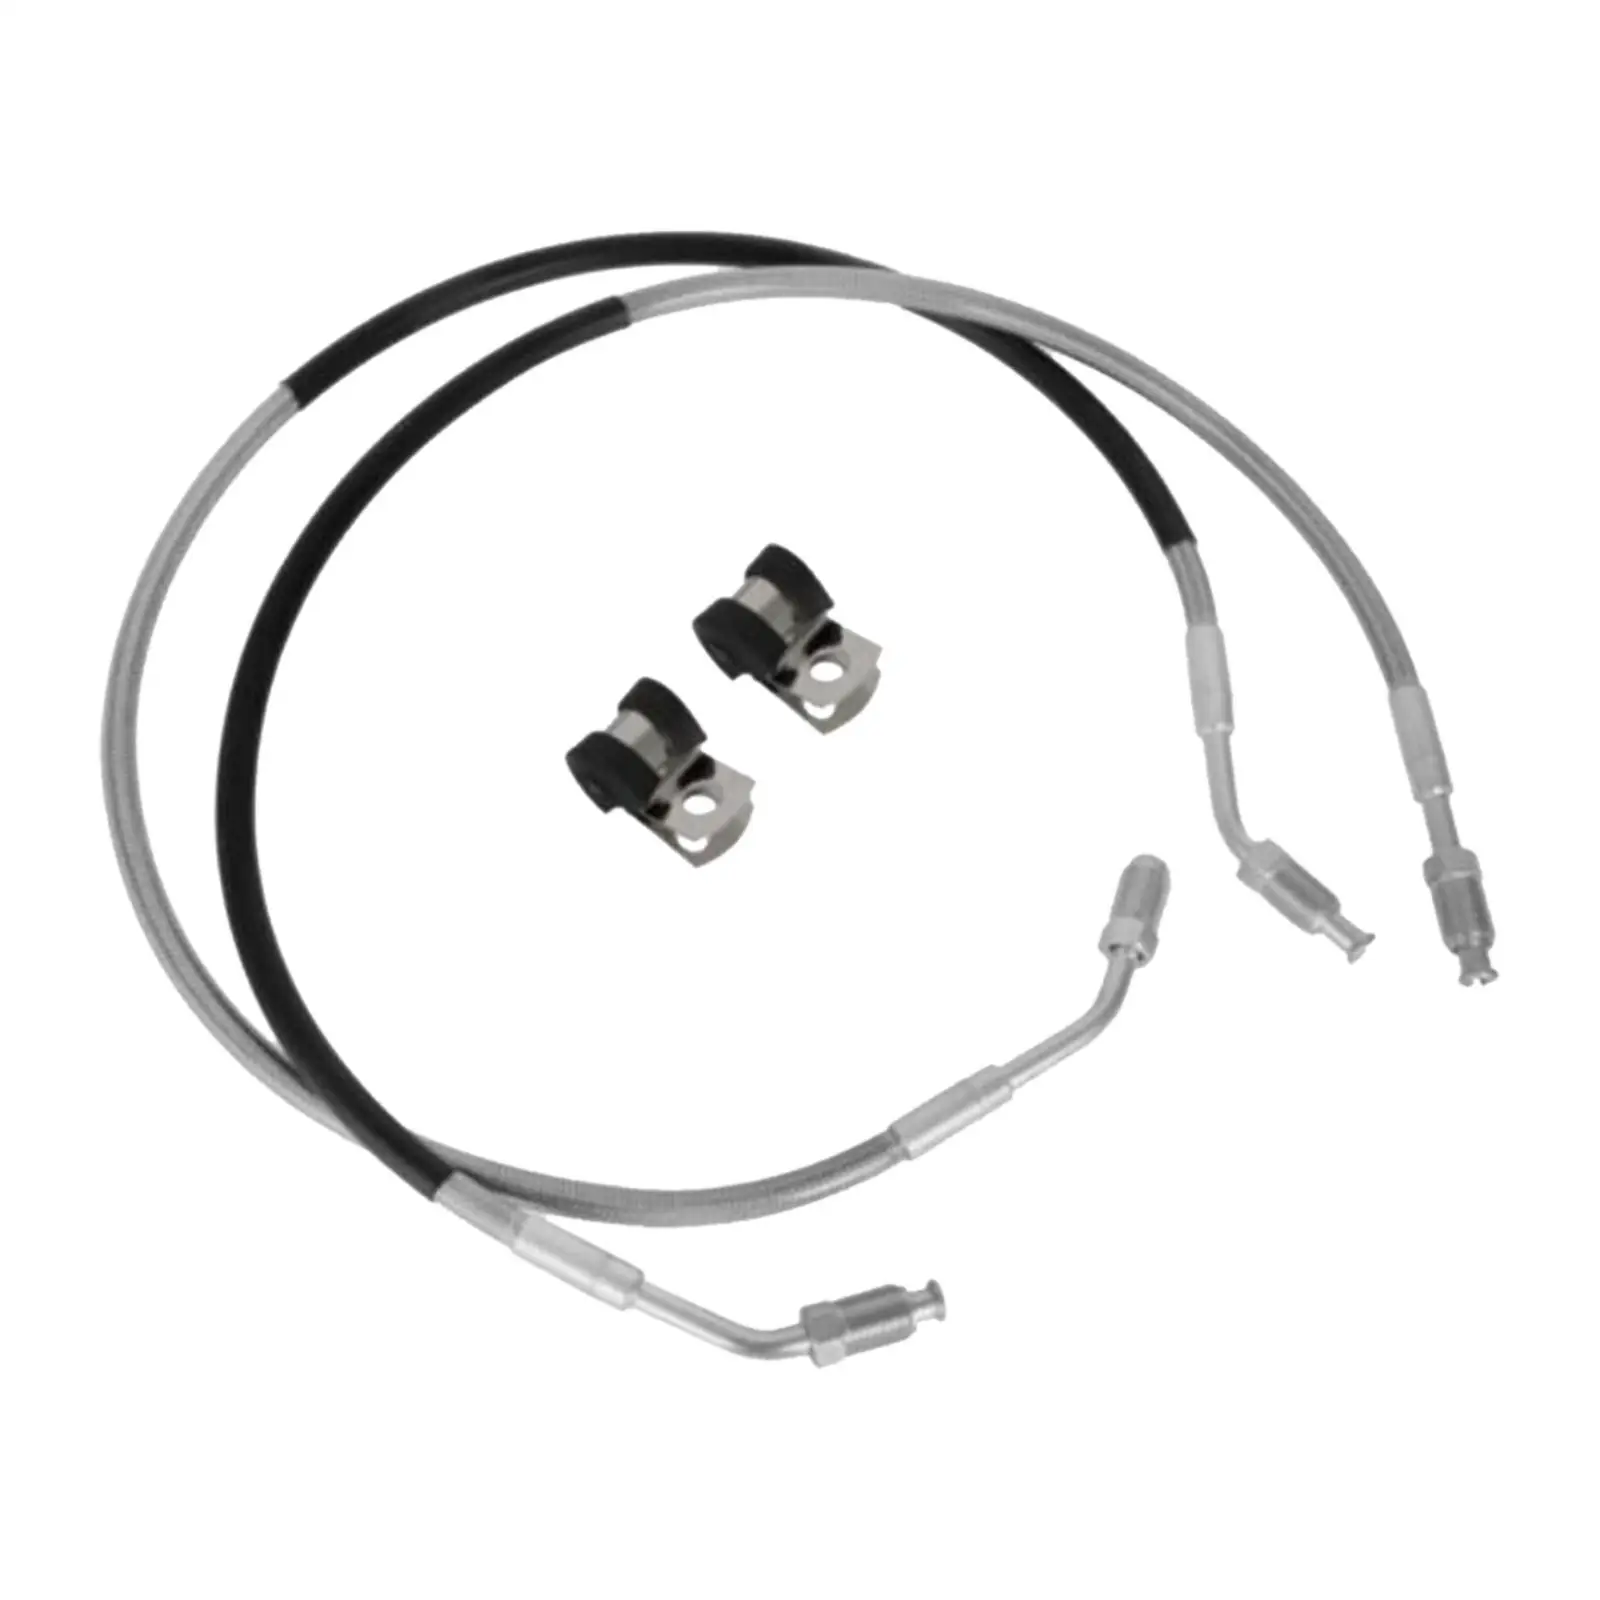 Front Left Right Brake Line 1930752 1930753 with Fittings for Polaris ATV Xpress 300 400 Xpedition 325 425 Worker 335 500